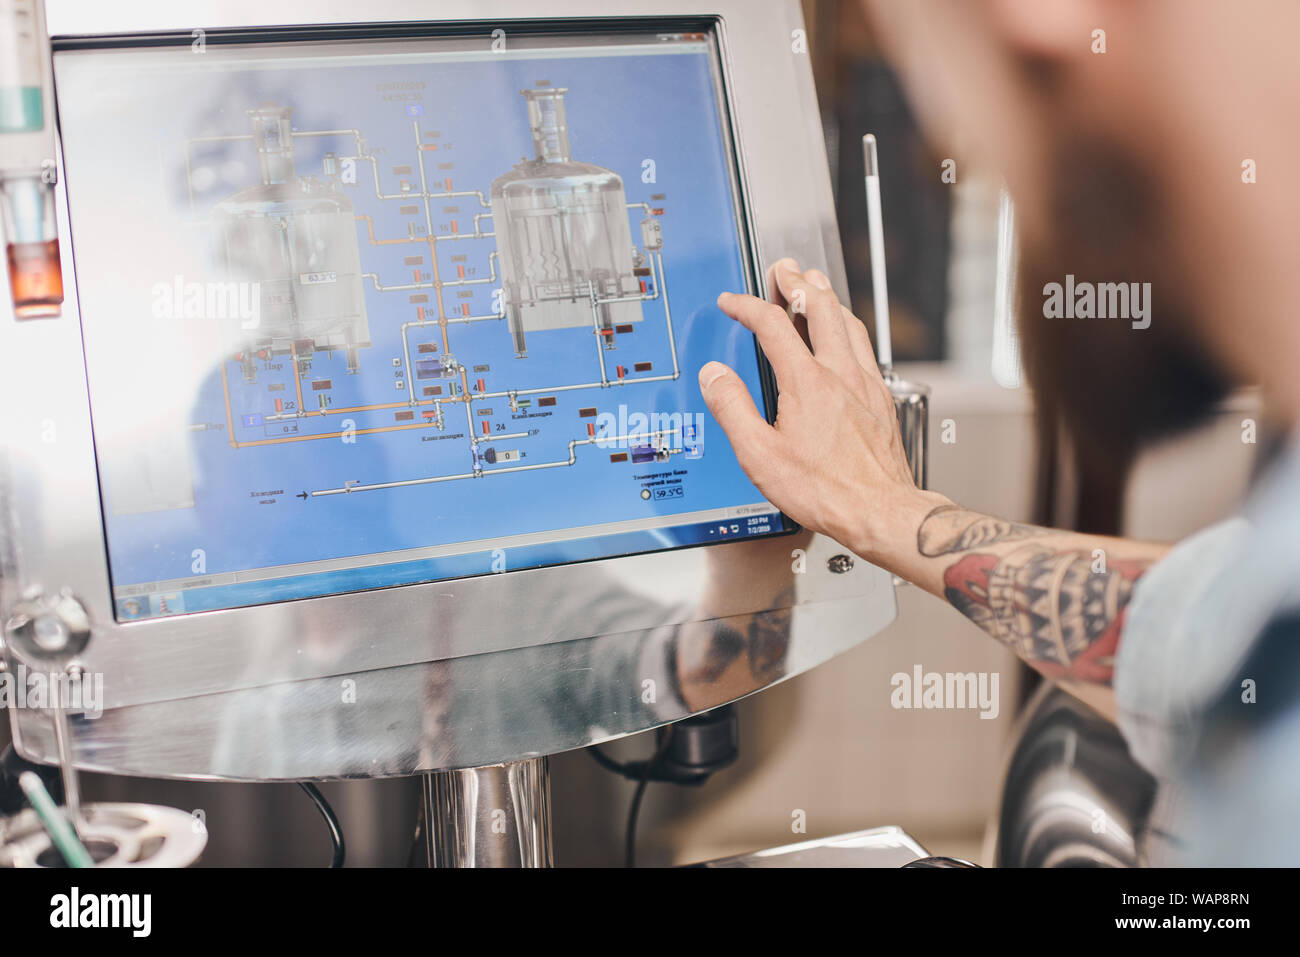 Brewery worker uses touch screens on the barrels to change storage settings. Stock Photo